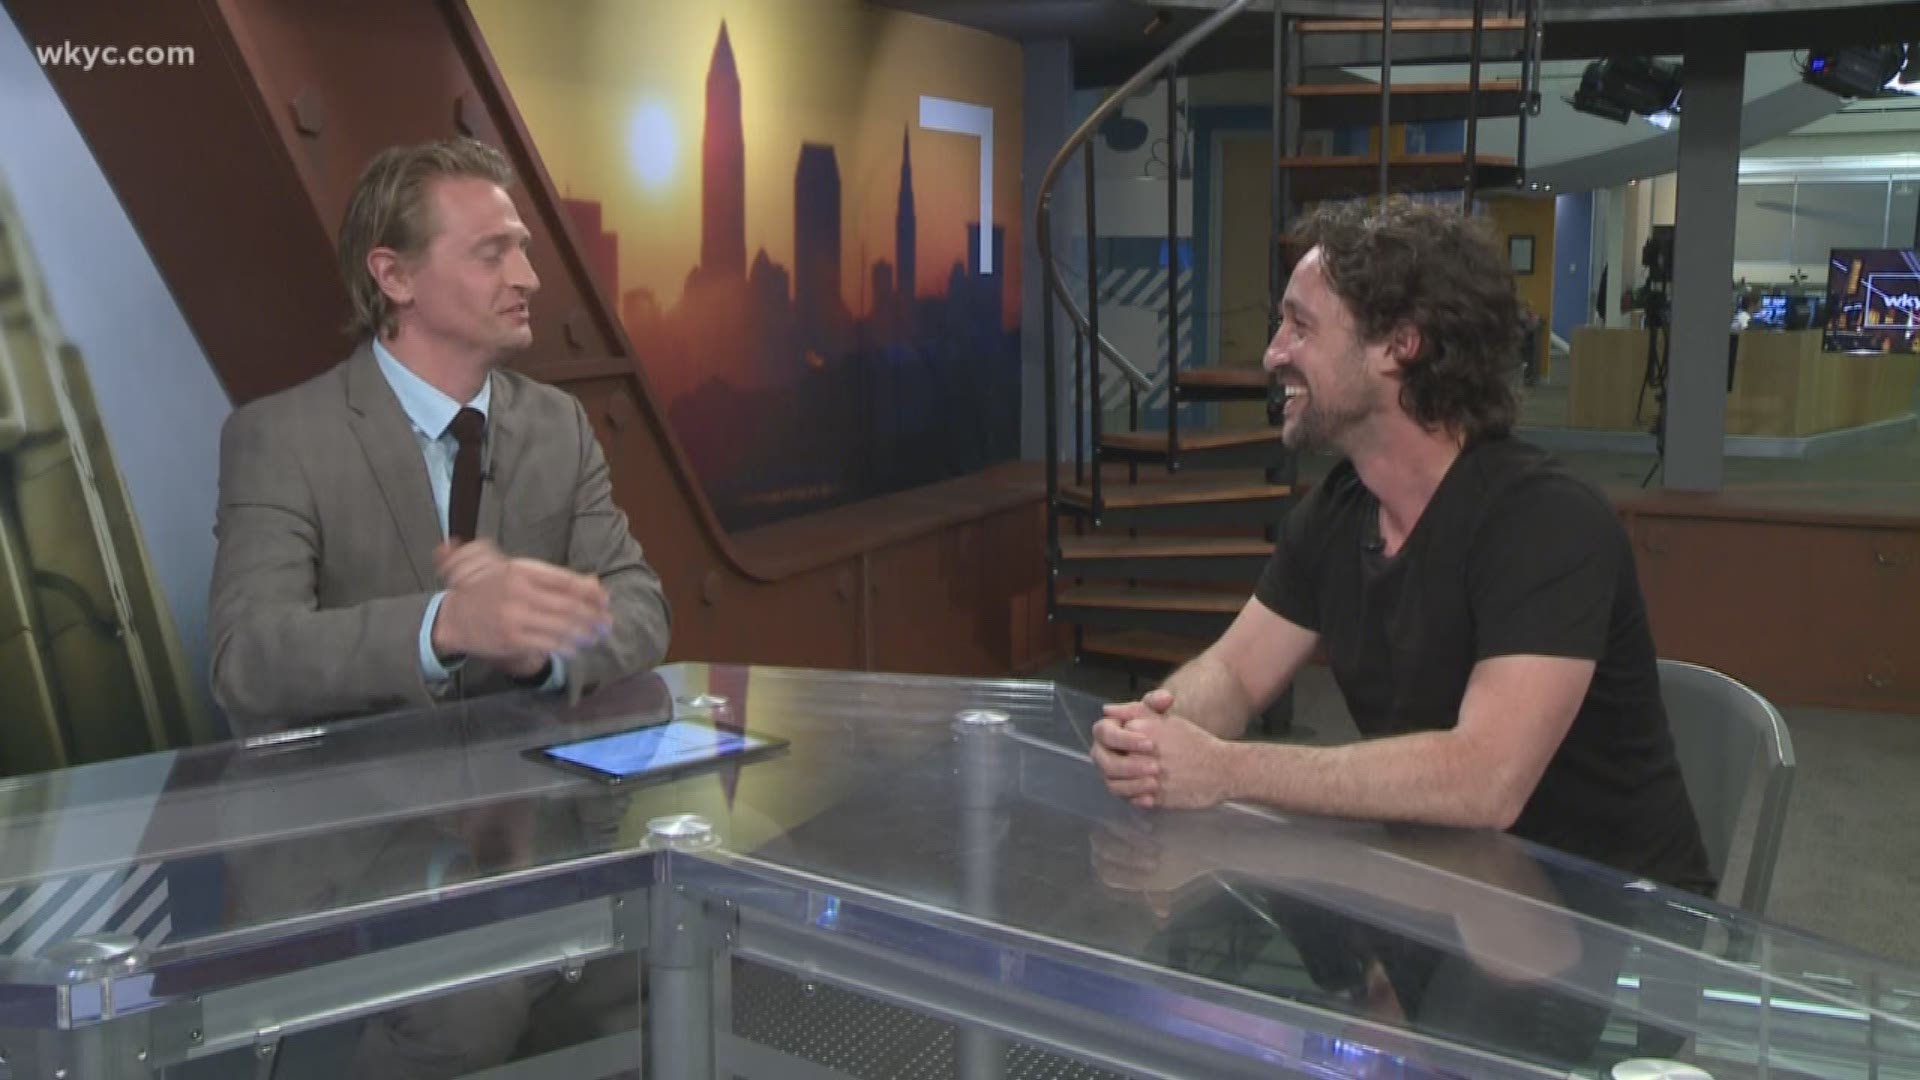 Actor Thomas Ian Nicholas in town for children's hospital benefit